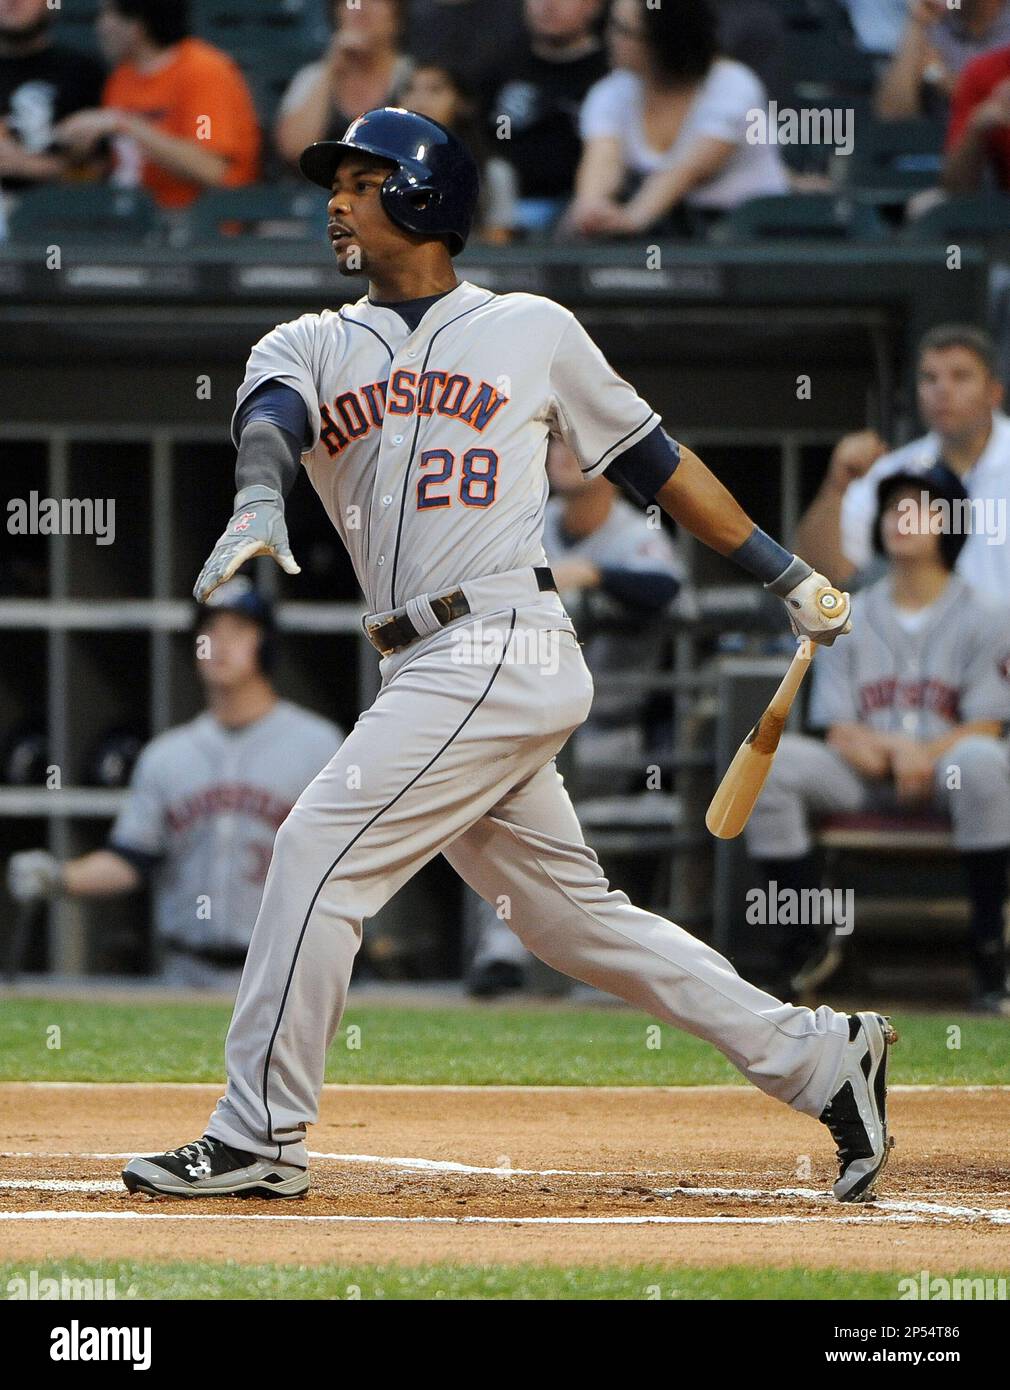 Coming Soon To A Stadium Near You: L.J. Hoes, OF, Houston Astros - Fake  Teams